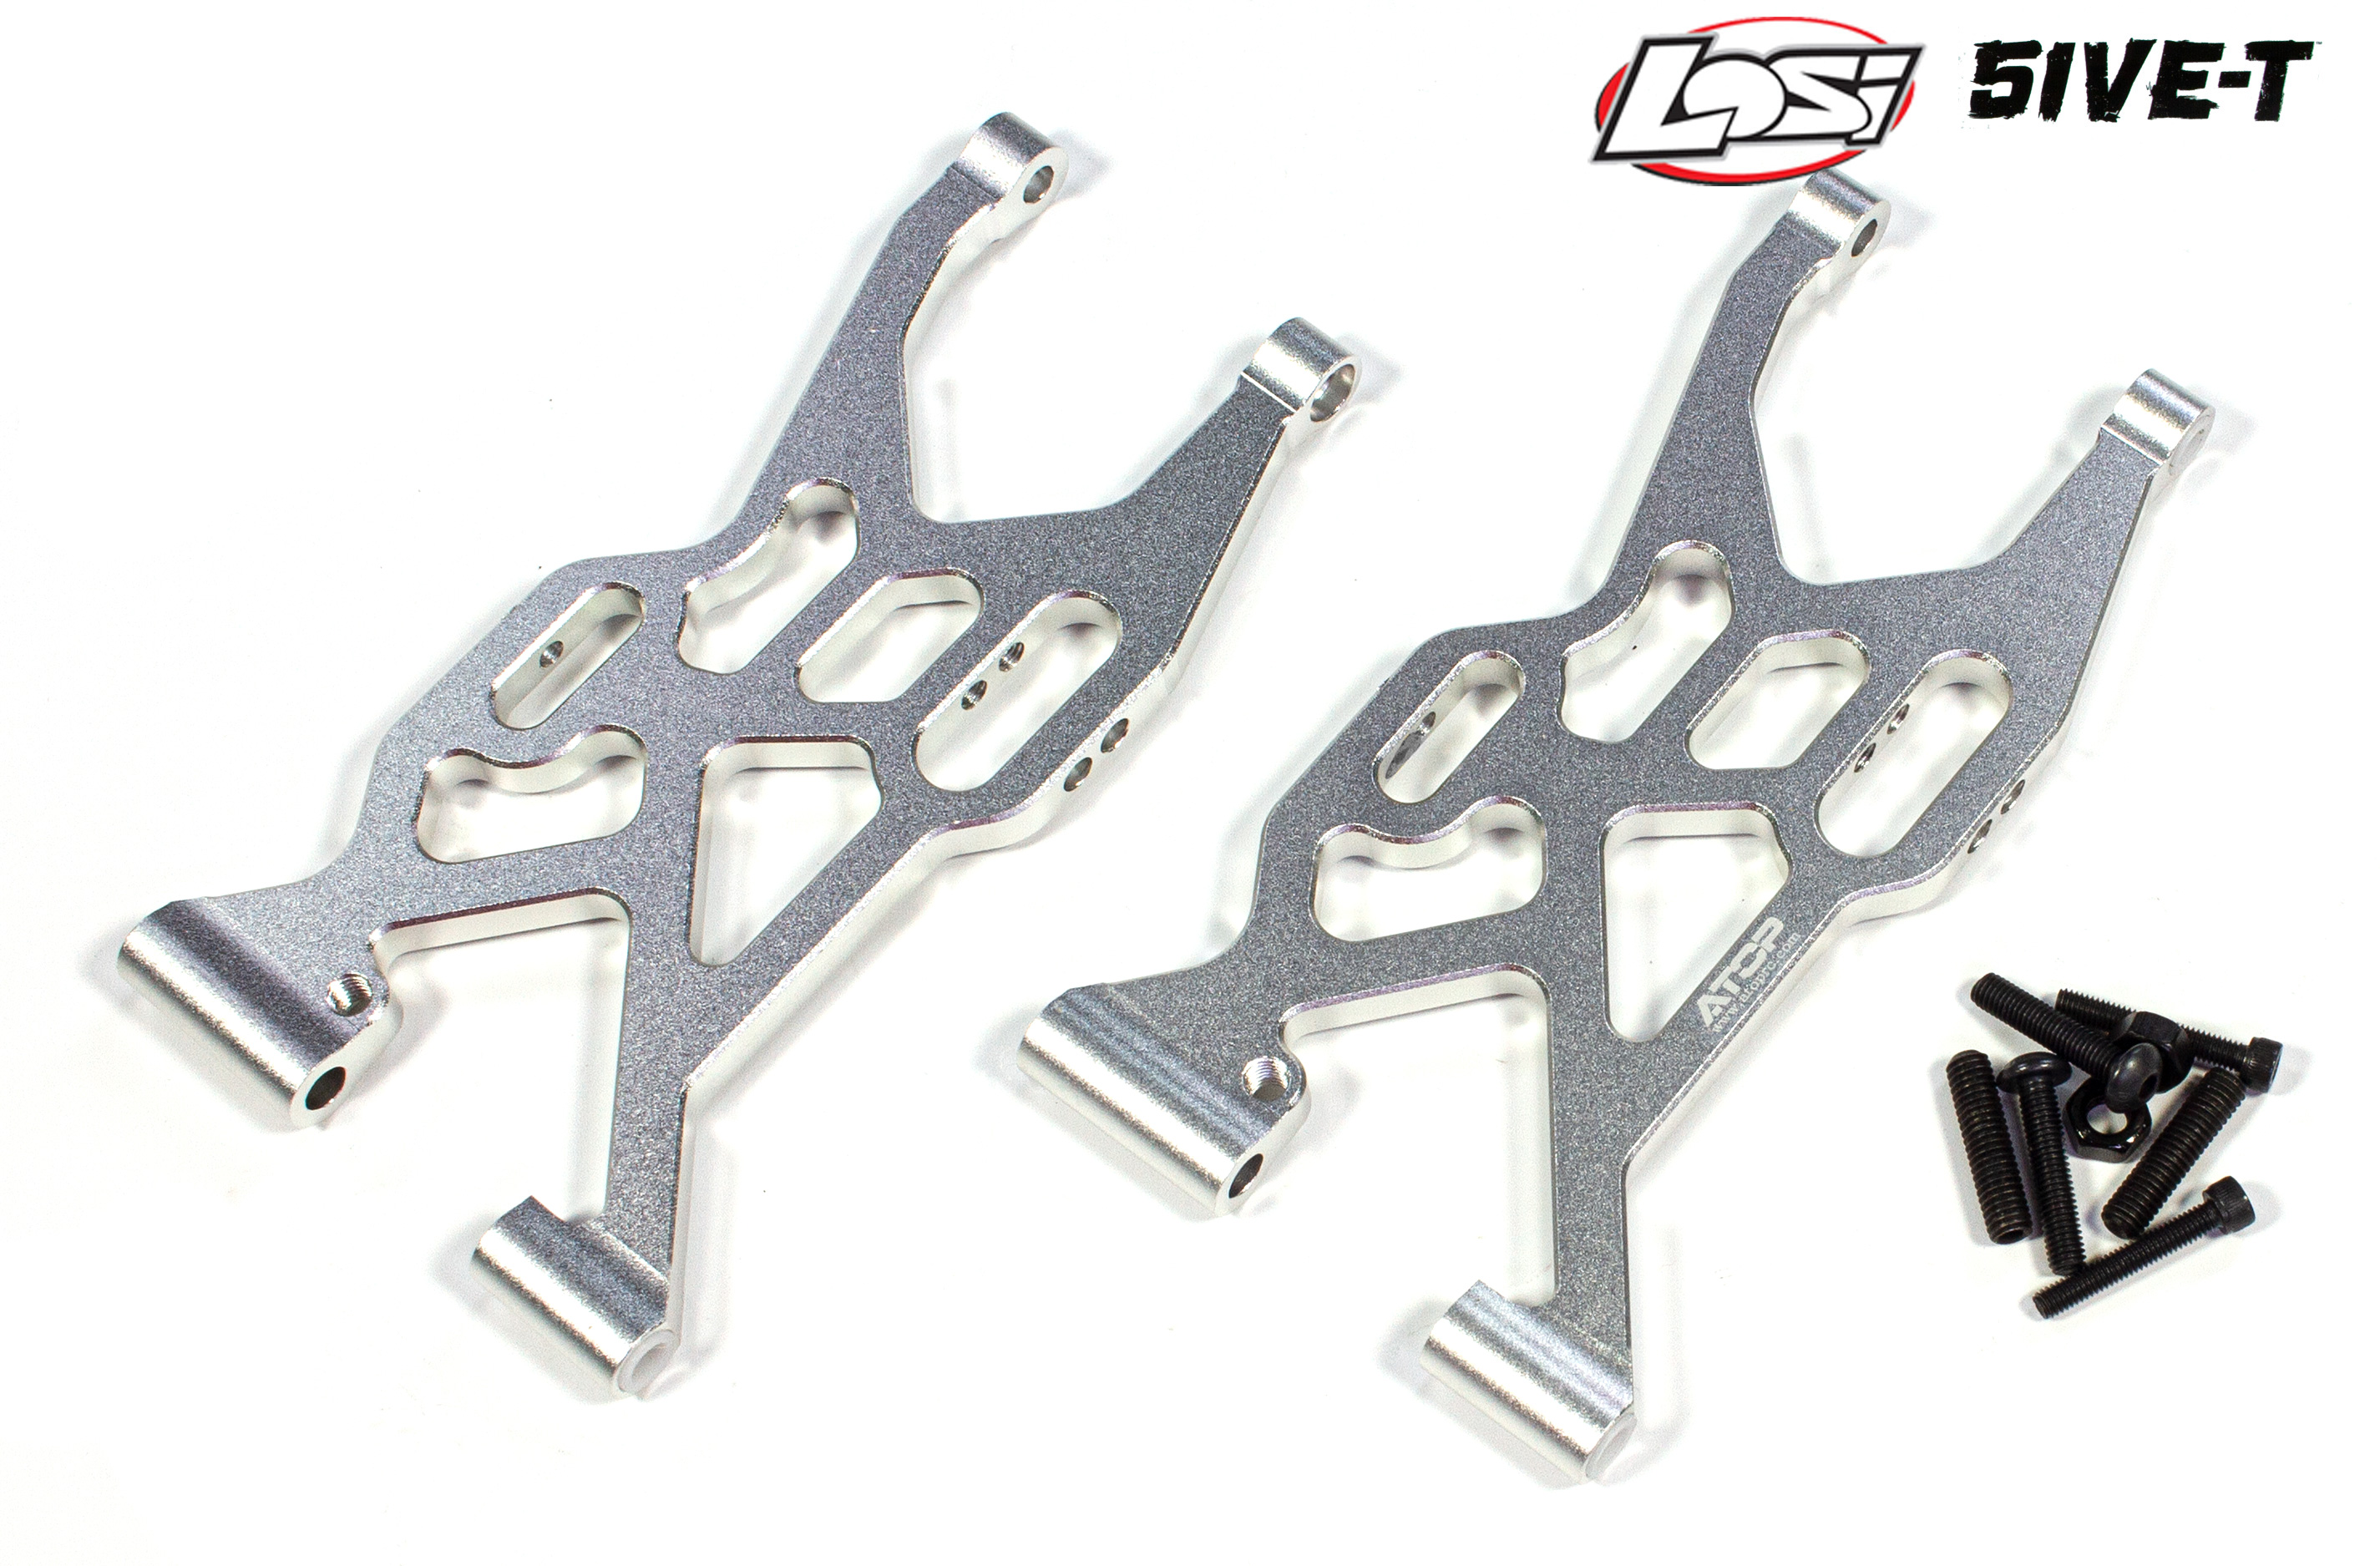 AT-5T024 ATOP Aluminum rear a-arms Losi 5ive-T/2.0